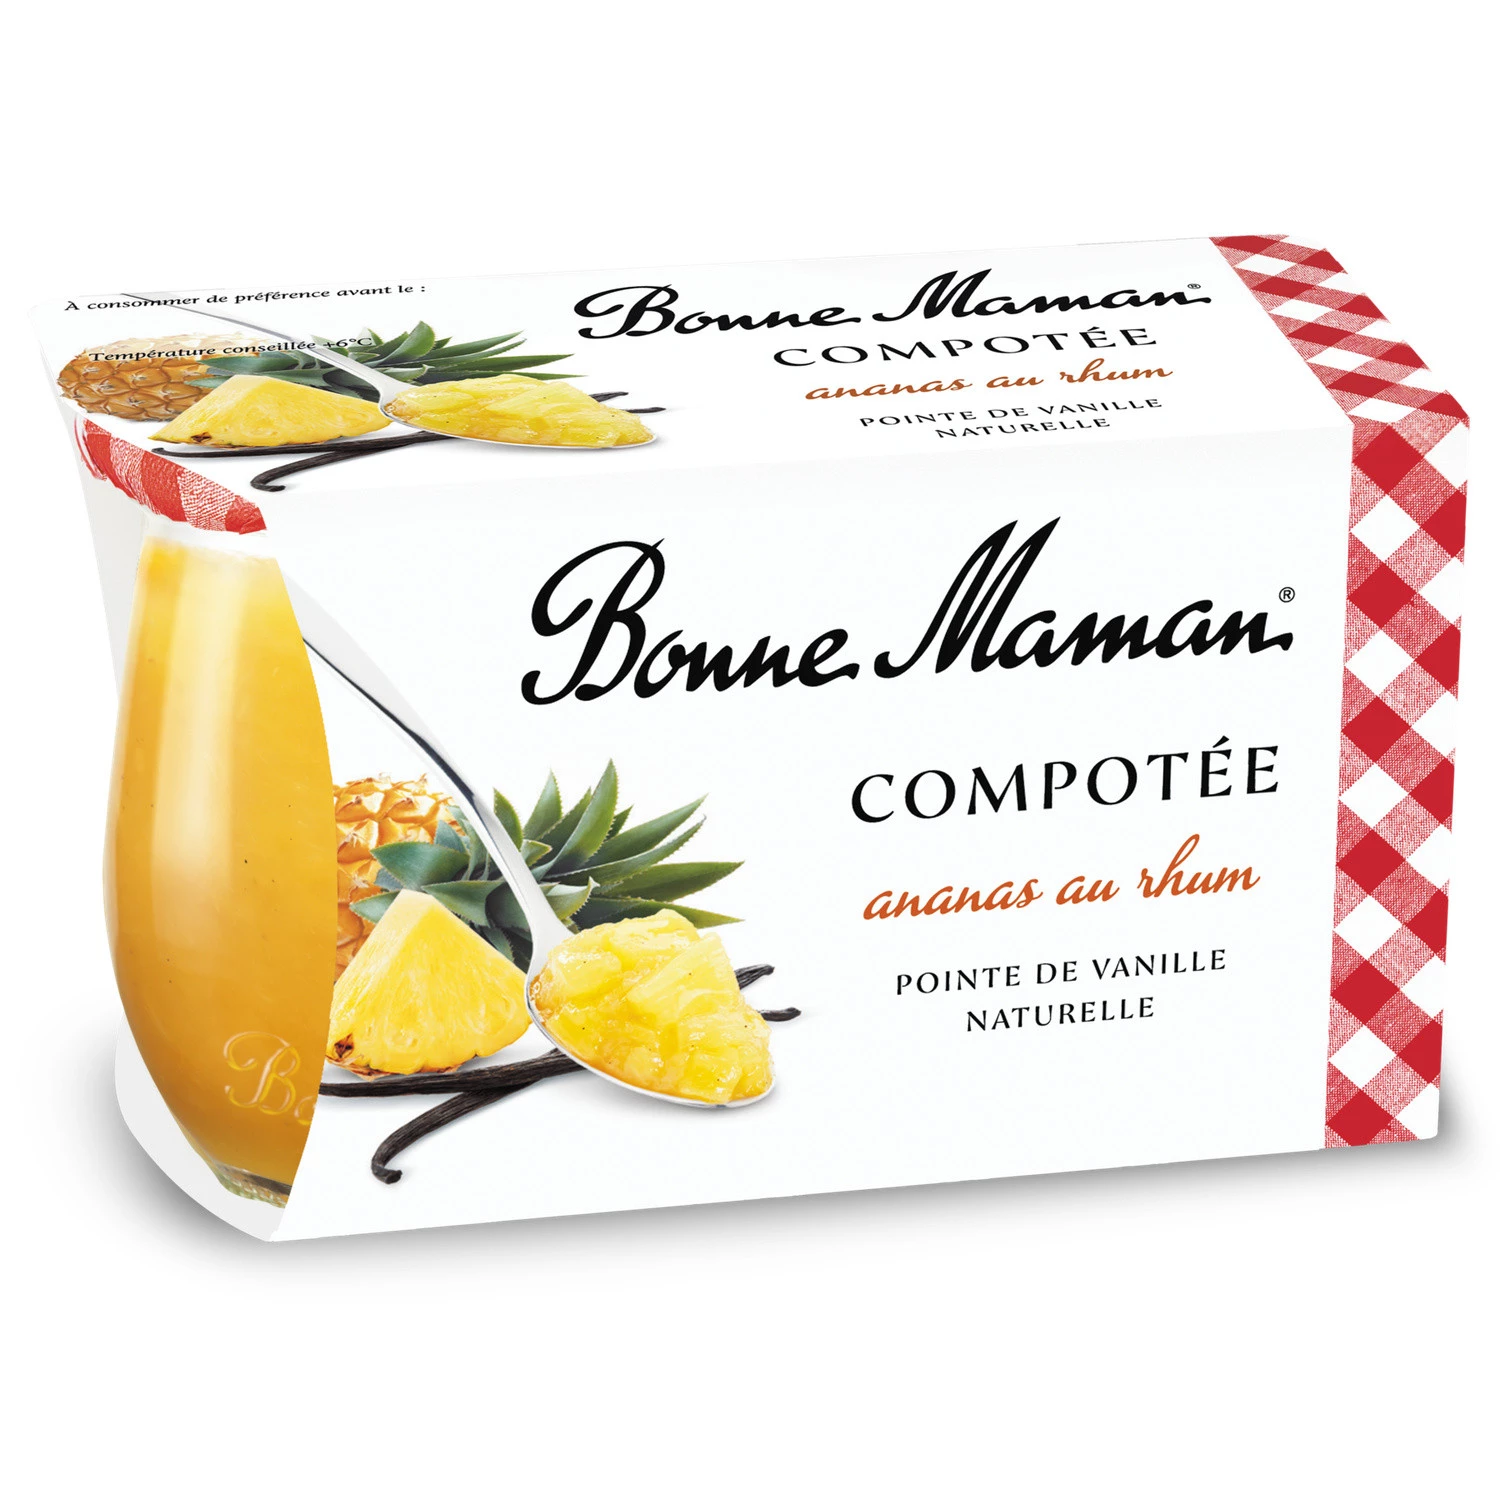 Bonne Maman Compote Pineapple with Rhum 2x130g